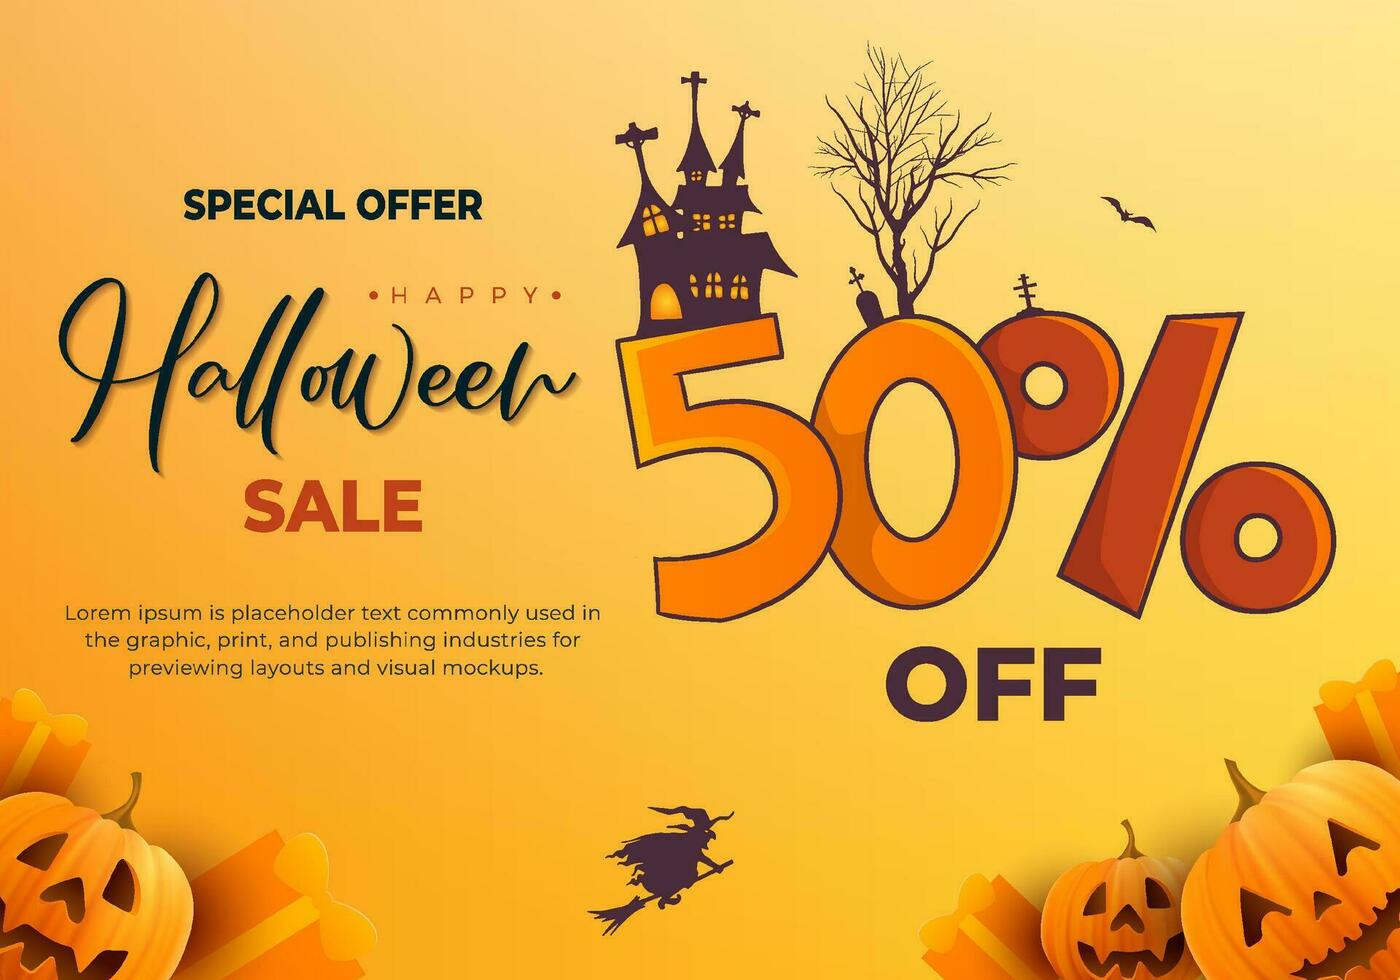 Happy halloween sale banner background with haunted house realistic pumpkins and illustration of text 50 vector